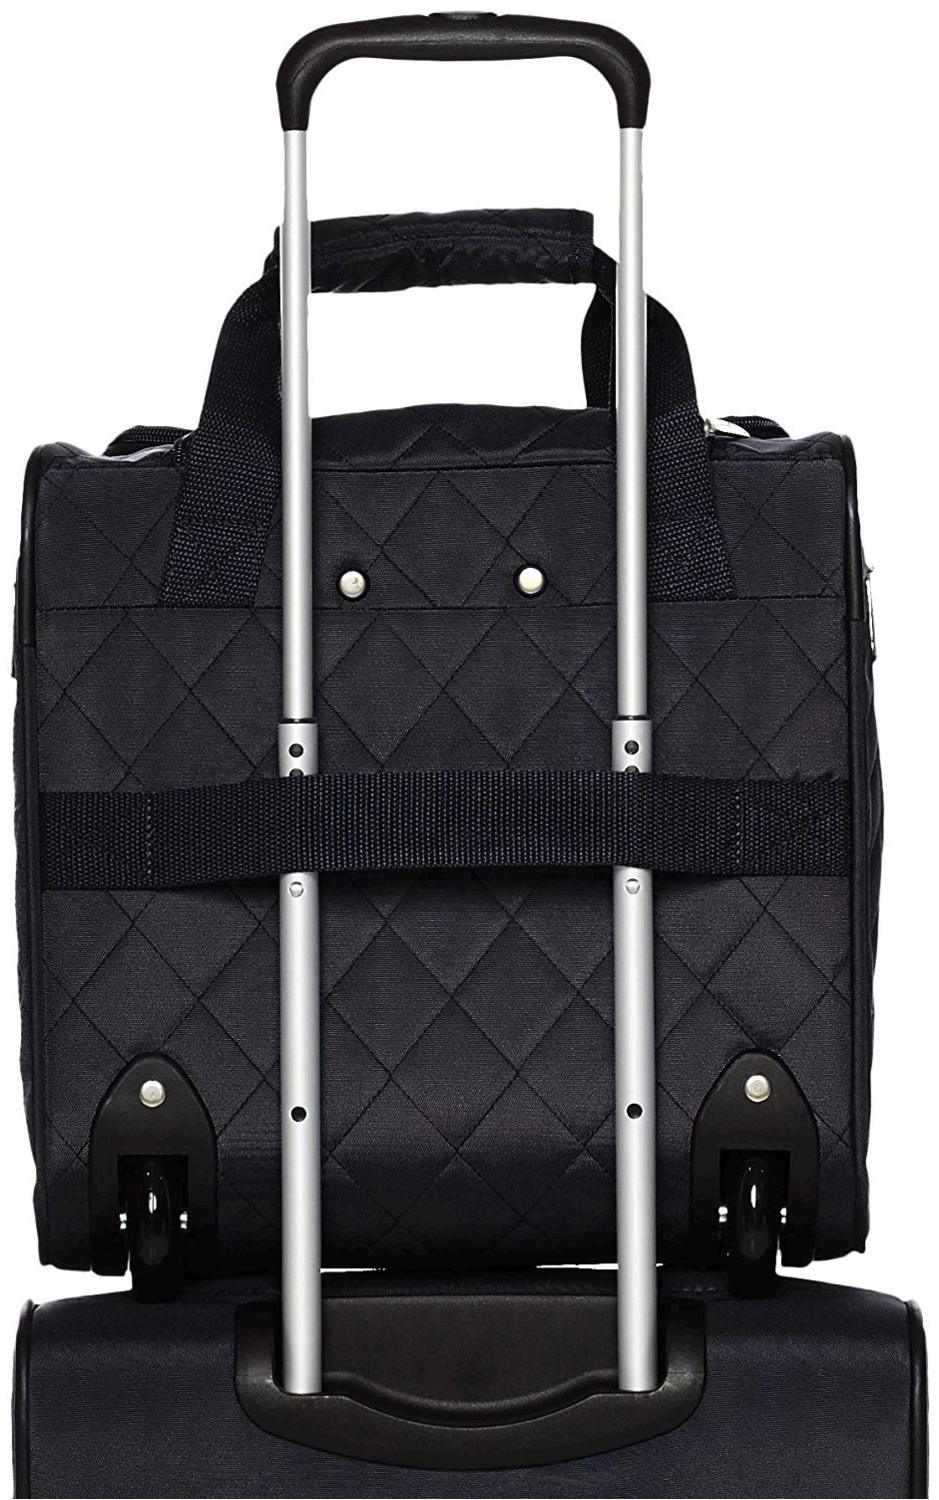 Basics Underseat Carry-On Rolling Travel Luggage, Black Quilted, Size 13.0 | eBay